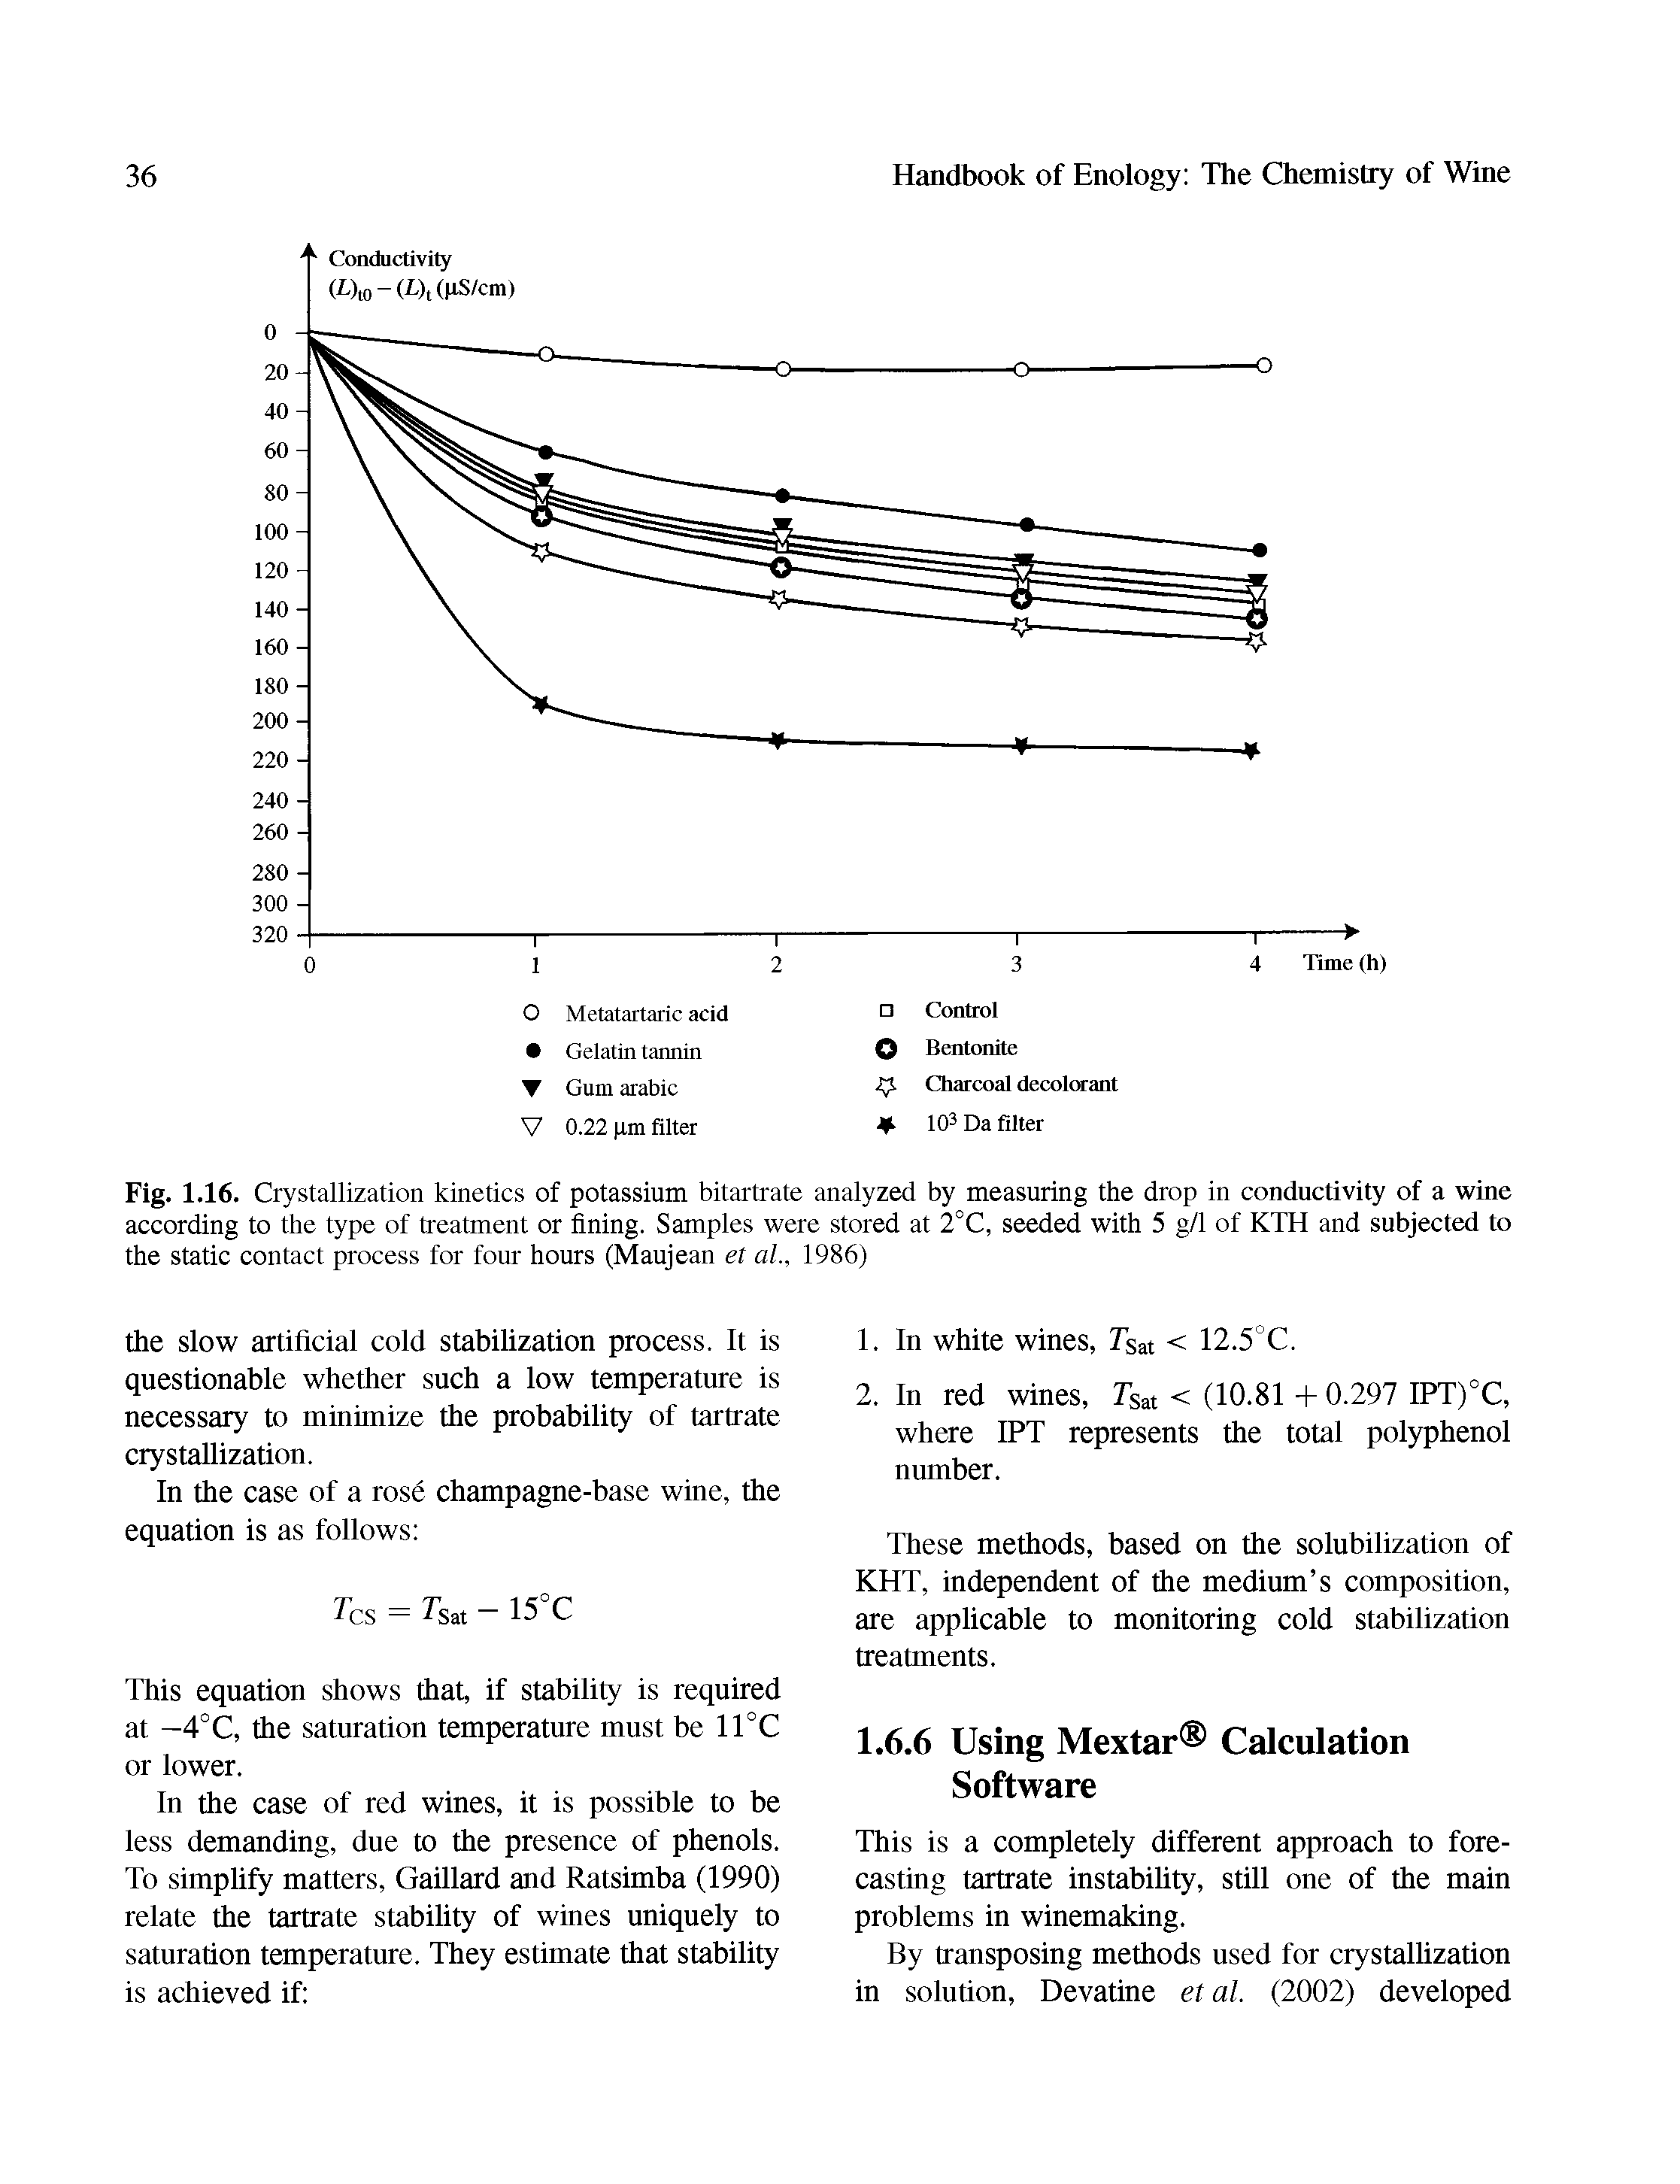 Fig. 1.16. Crystallization kinetics of potassium bitartrate analyzed by measuring the drop in conductivity of a wine according to the type of treatment or fining. Samples were stored at 2°C, seeded with 5 g/1 of KTH and subjected to the static contact process for four hours (Maujean et ah, 1986)...